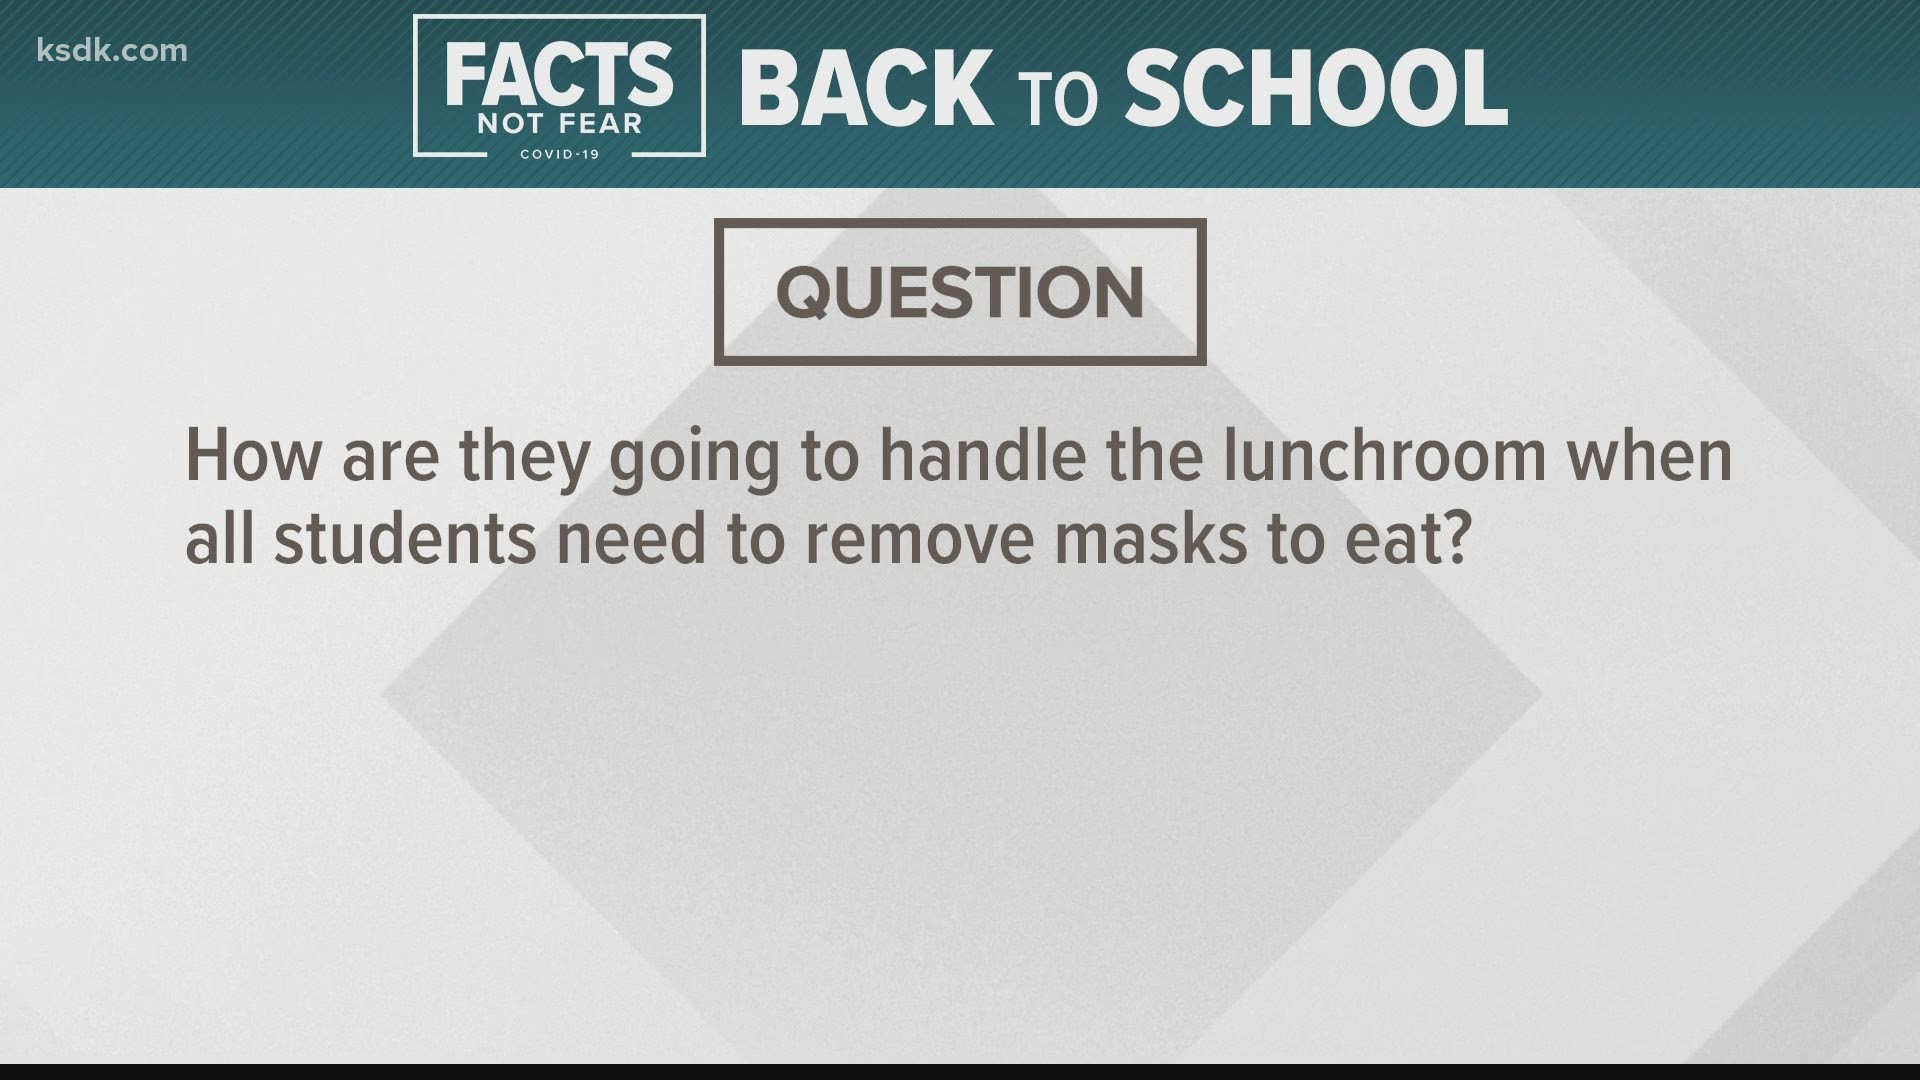 We're answering all of your back-to-school questions.